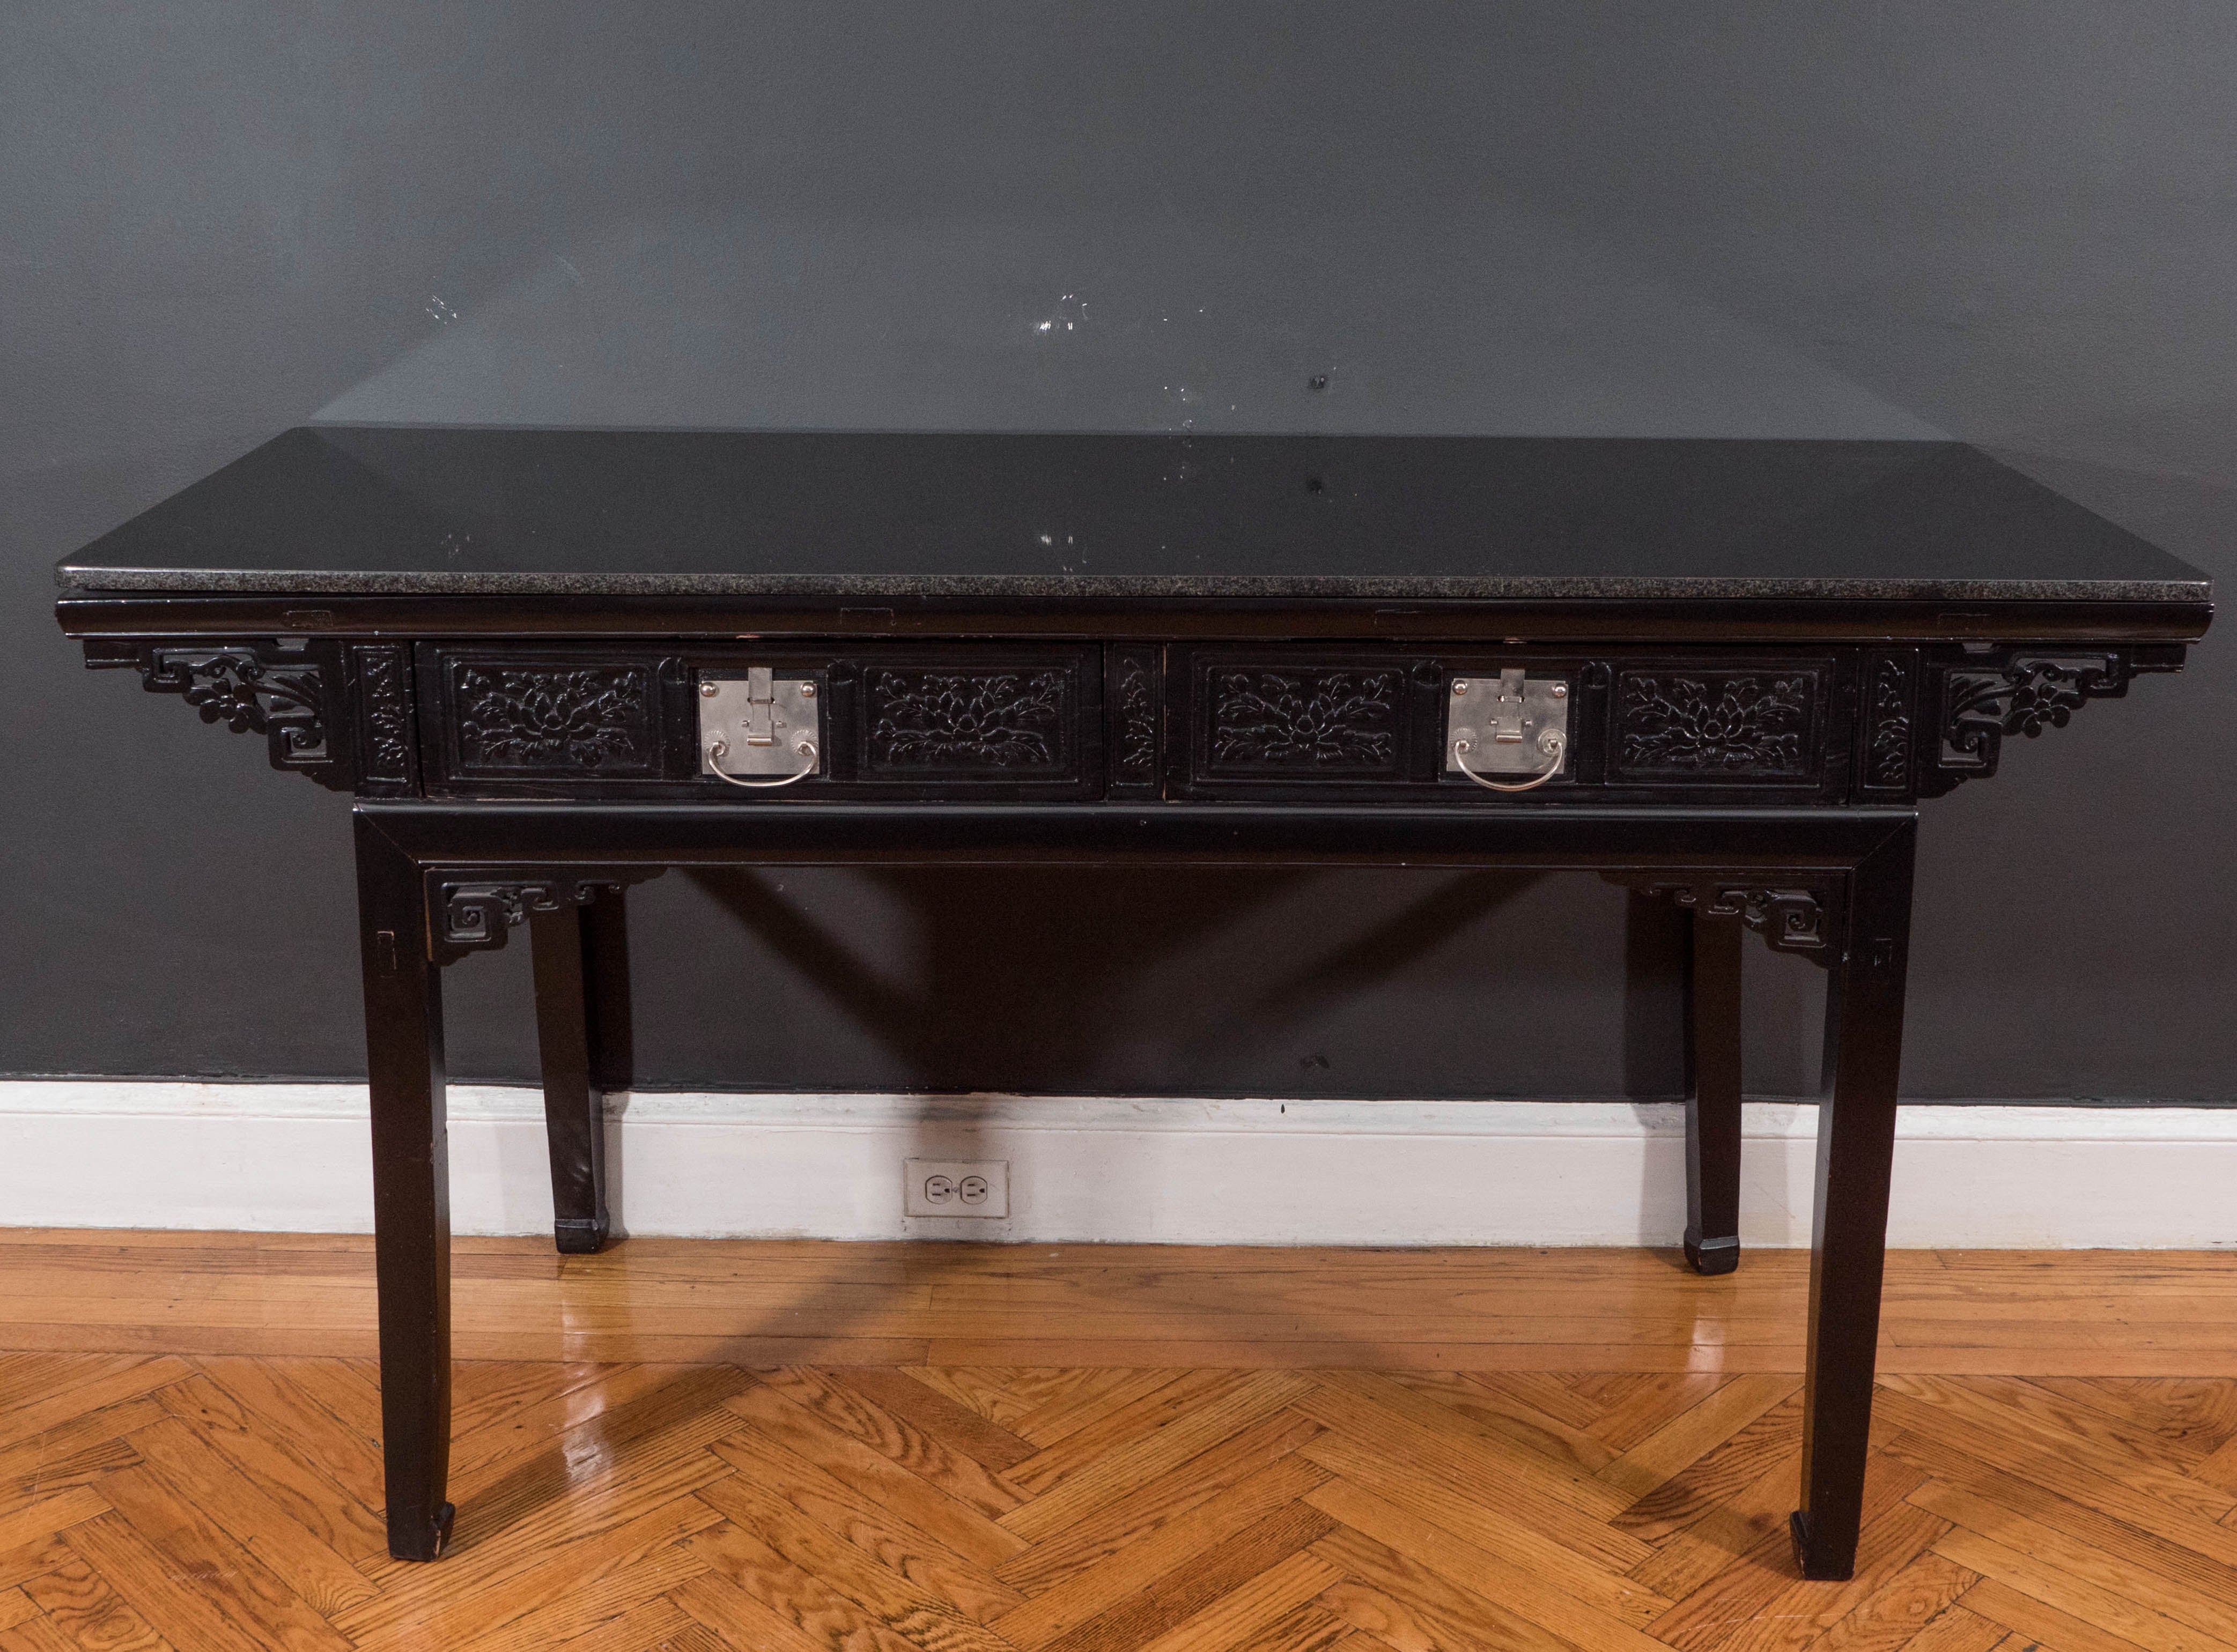 19th century black lacquer Chinese alter table.